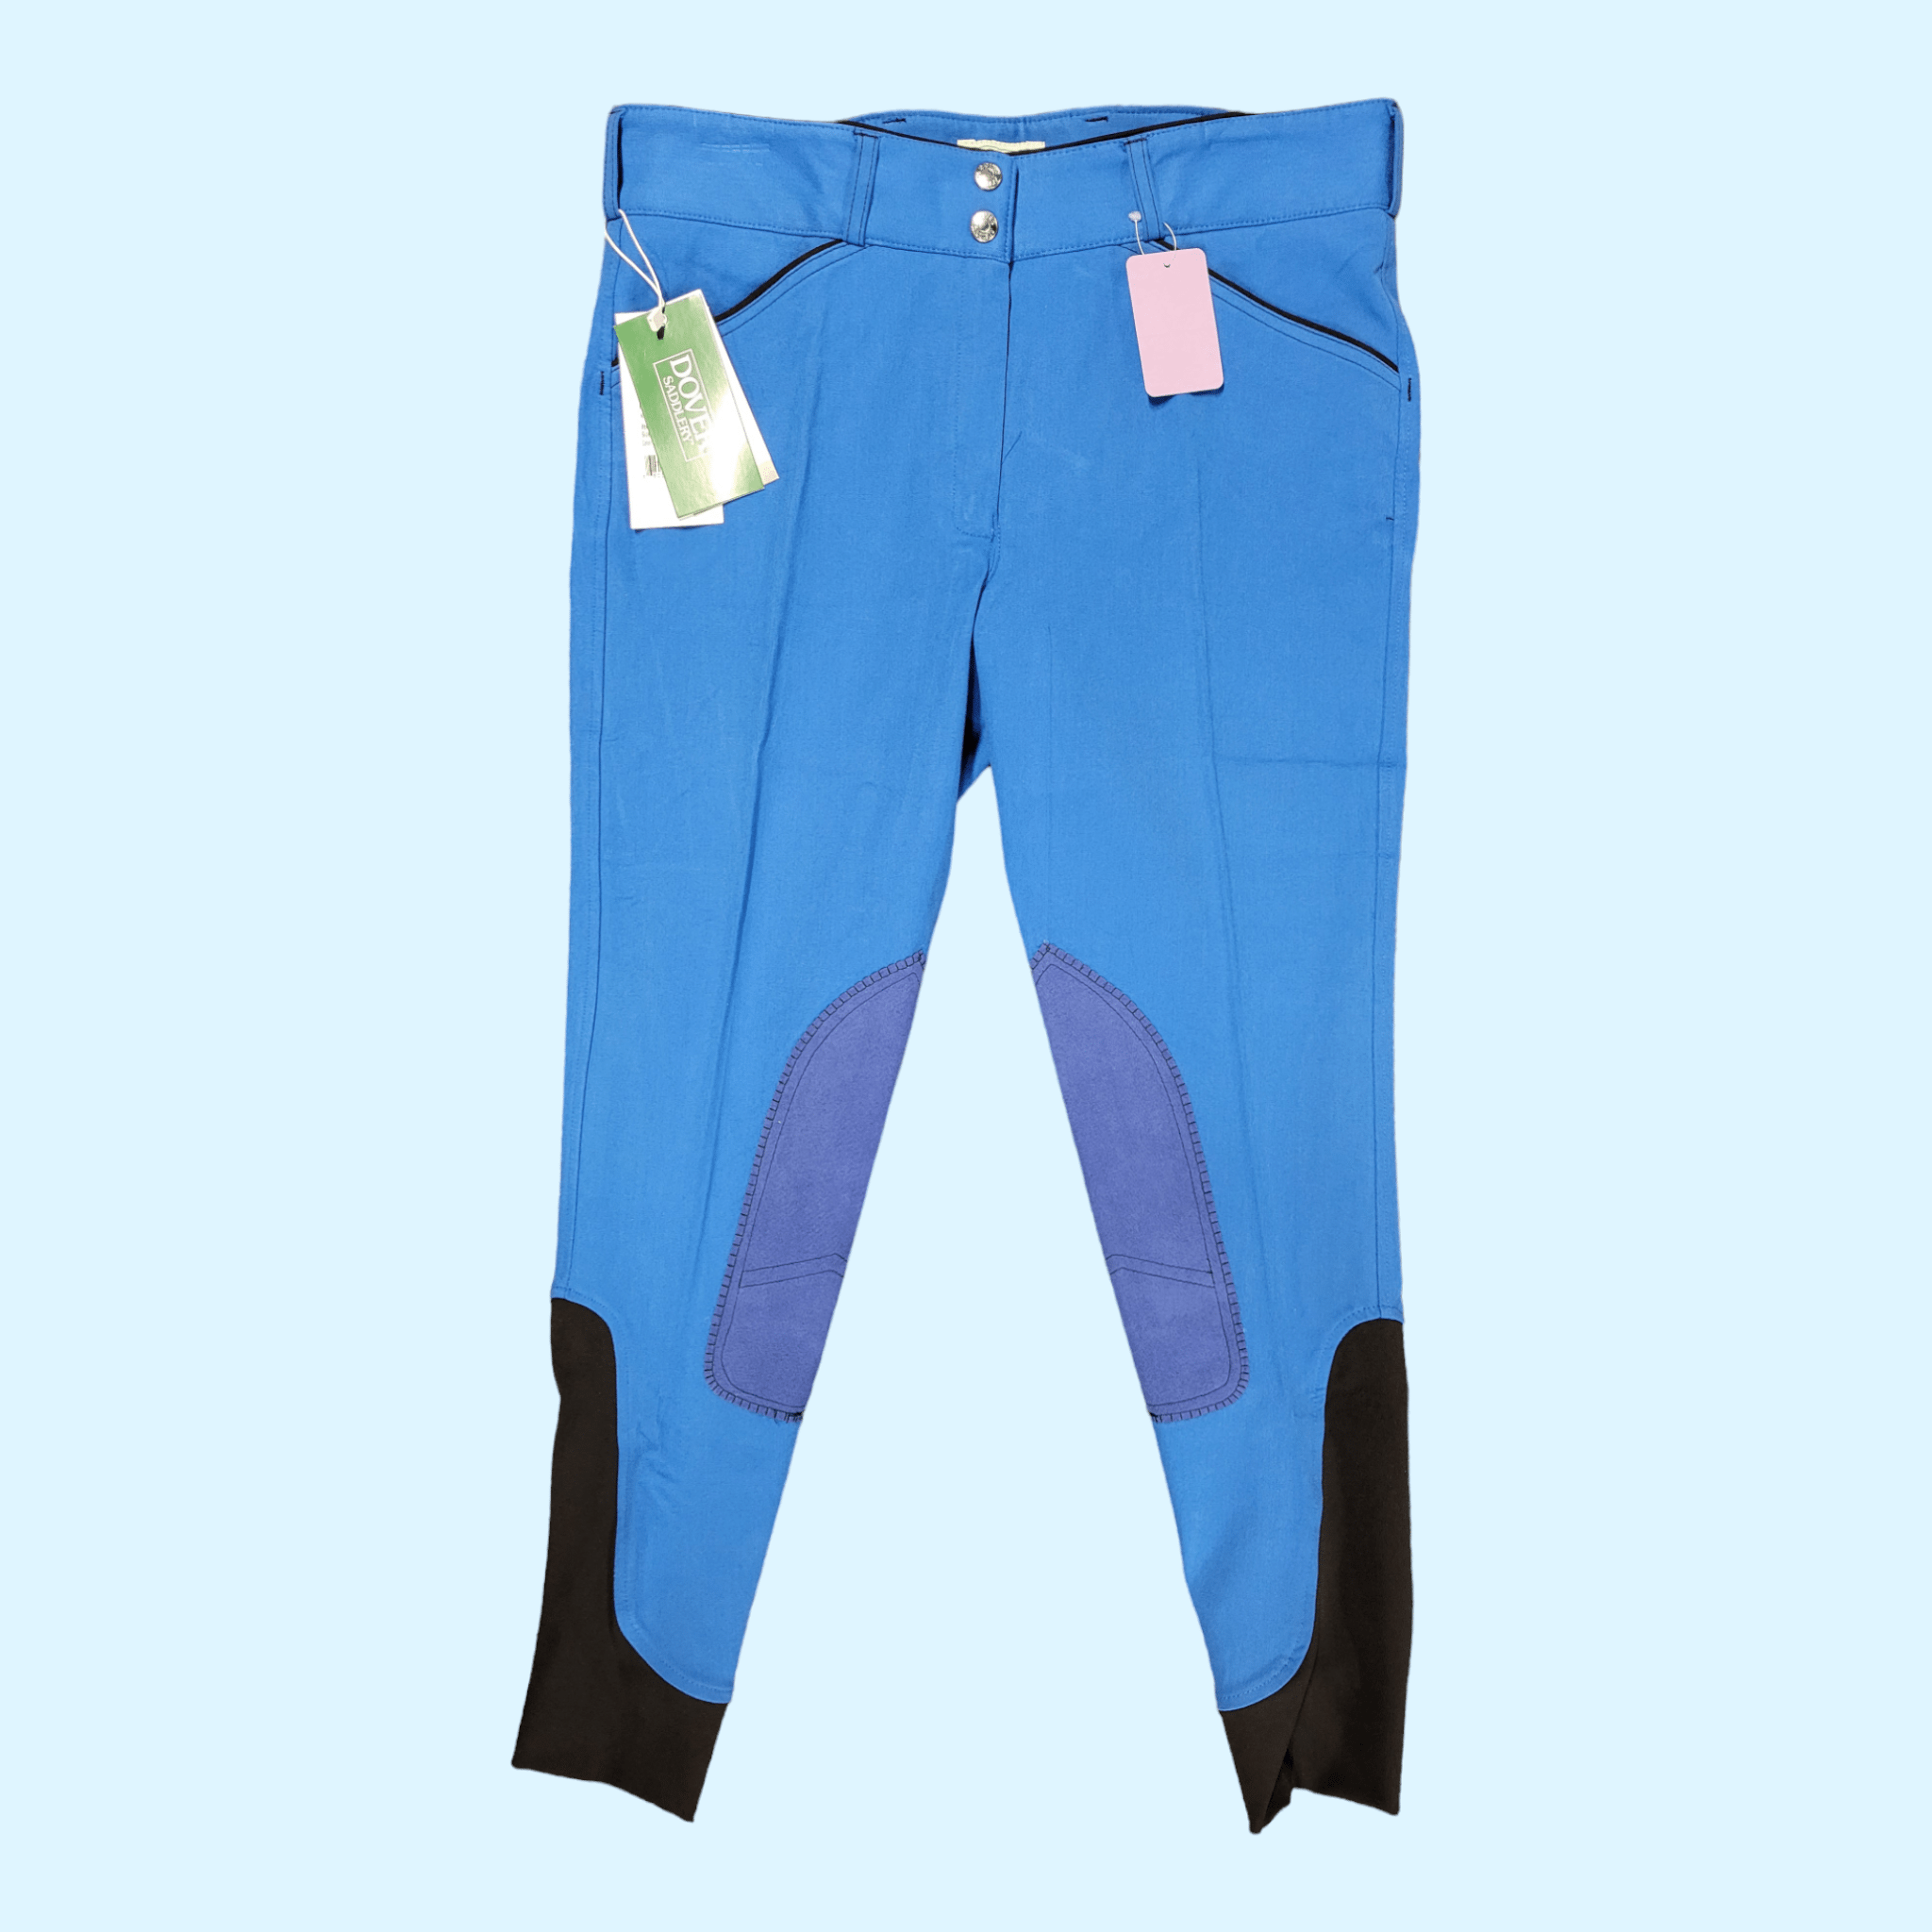 Dover Knee Patch Breeches in Blue - 30